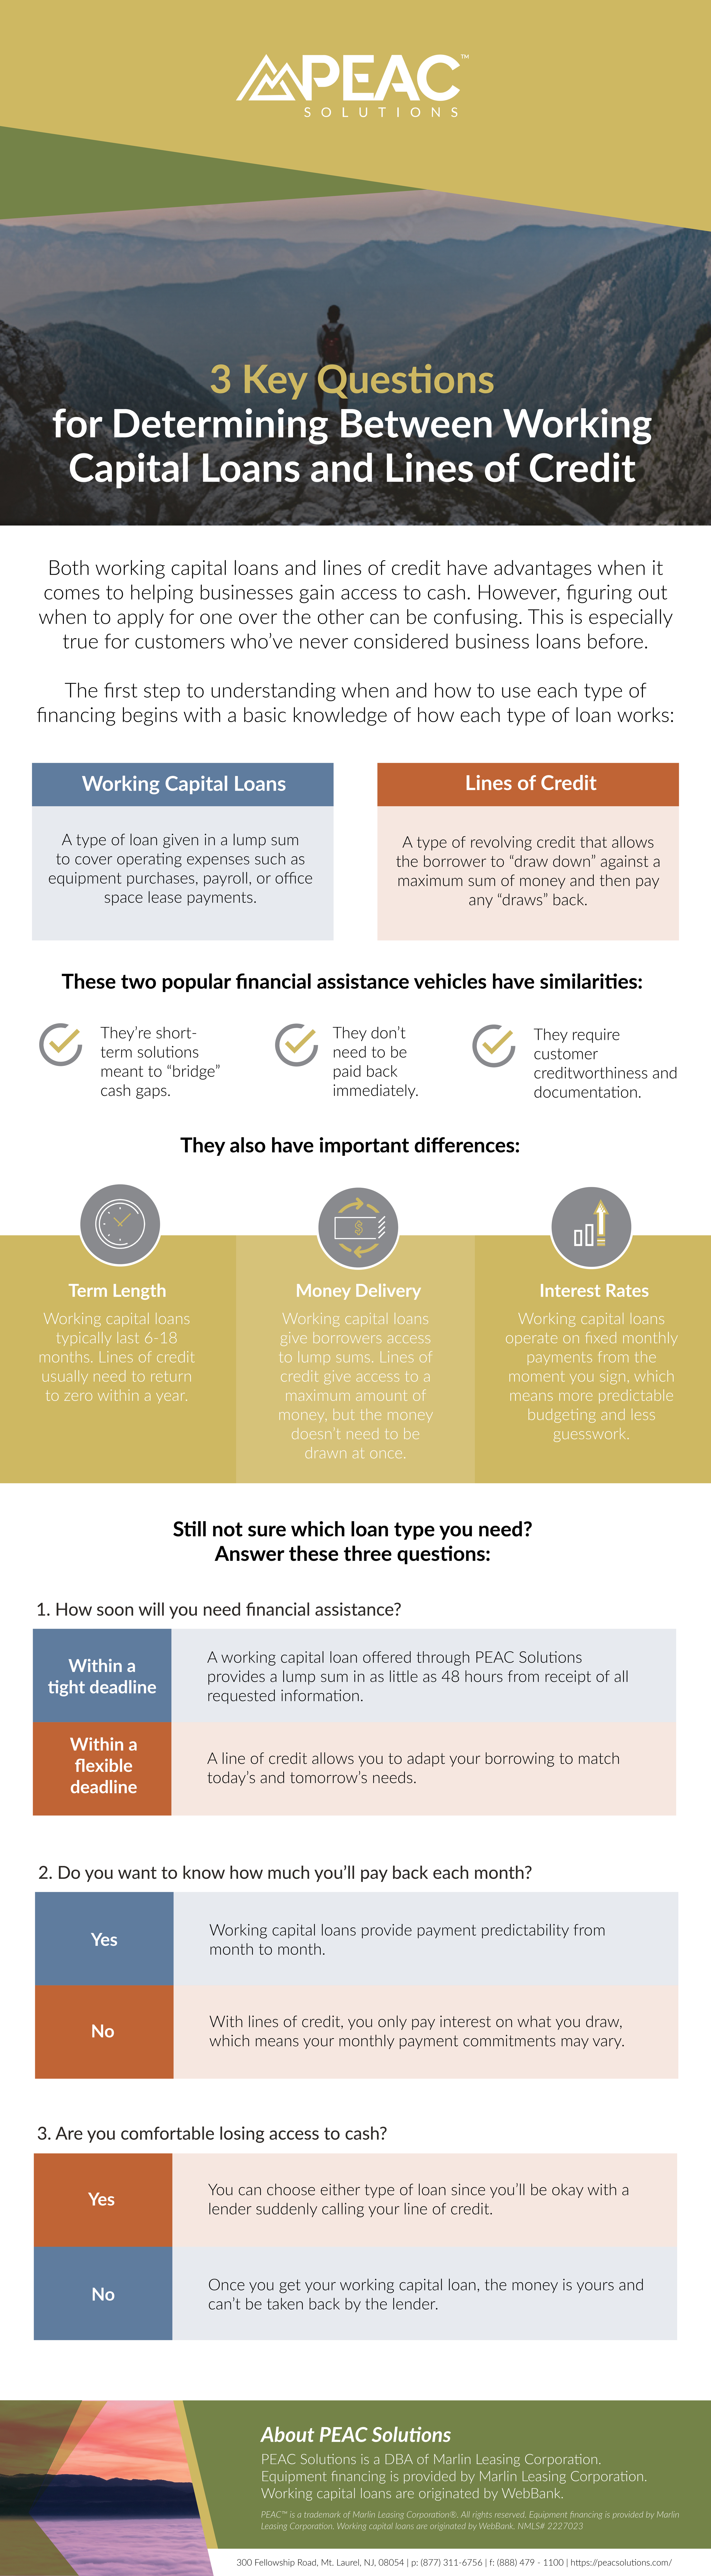 3 Key Questions for Determining Between Working Capital Loans and Lines of Credit Infographic